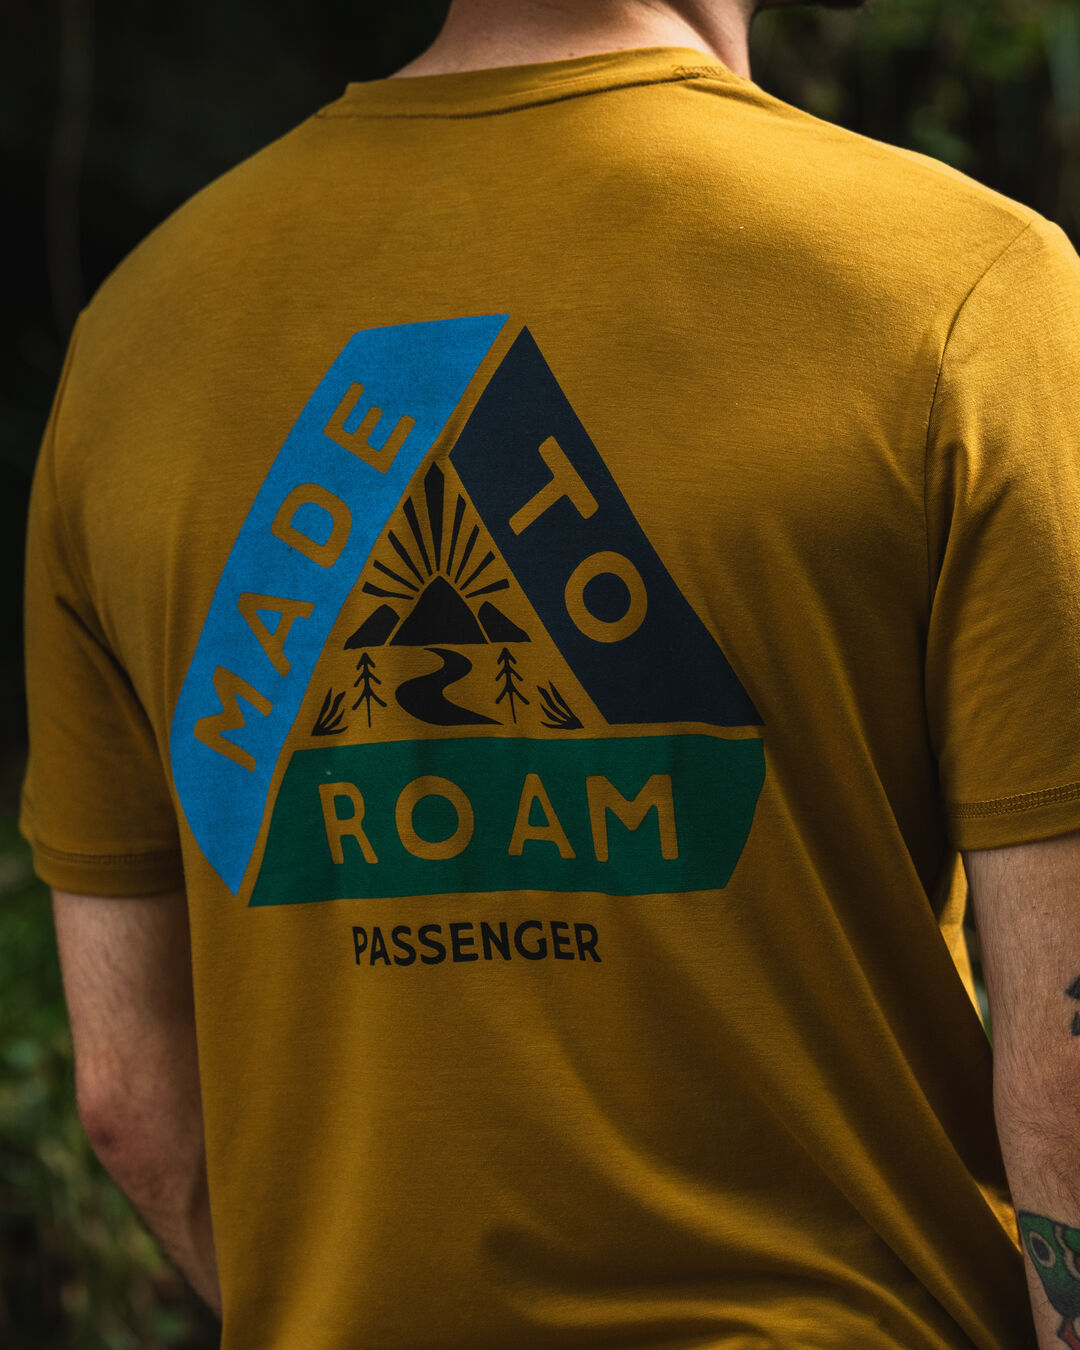 Trail Active Recycled T-shirt - Dusty Ochre